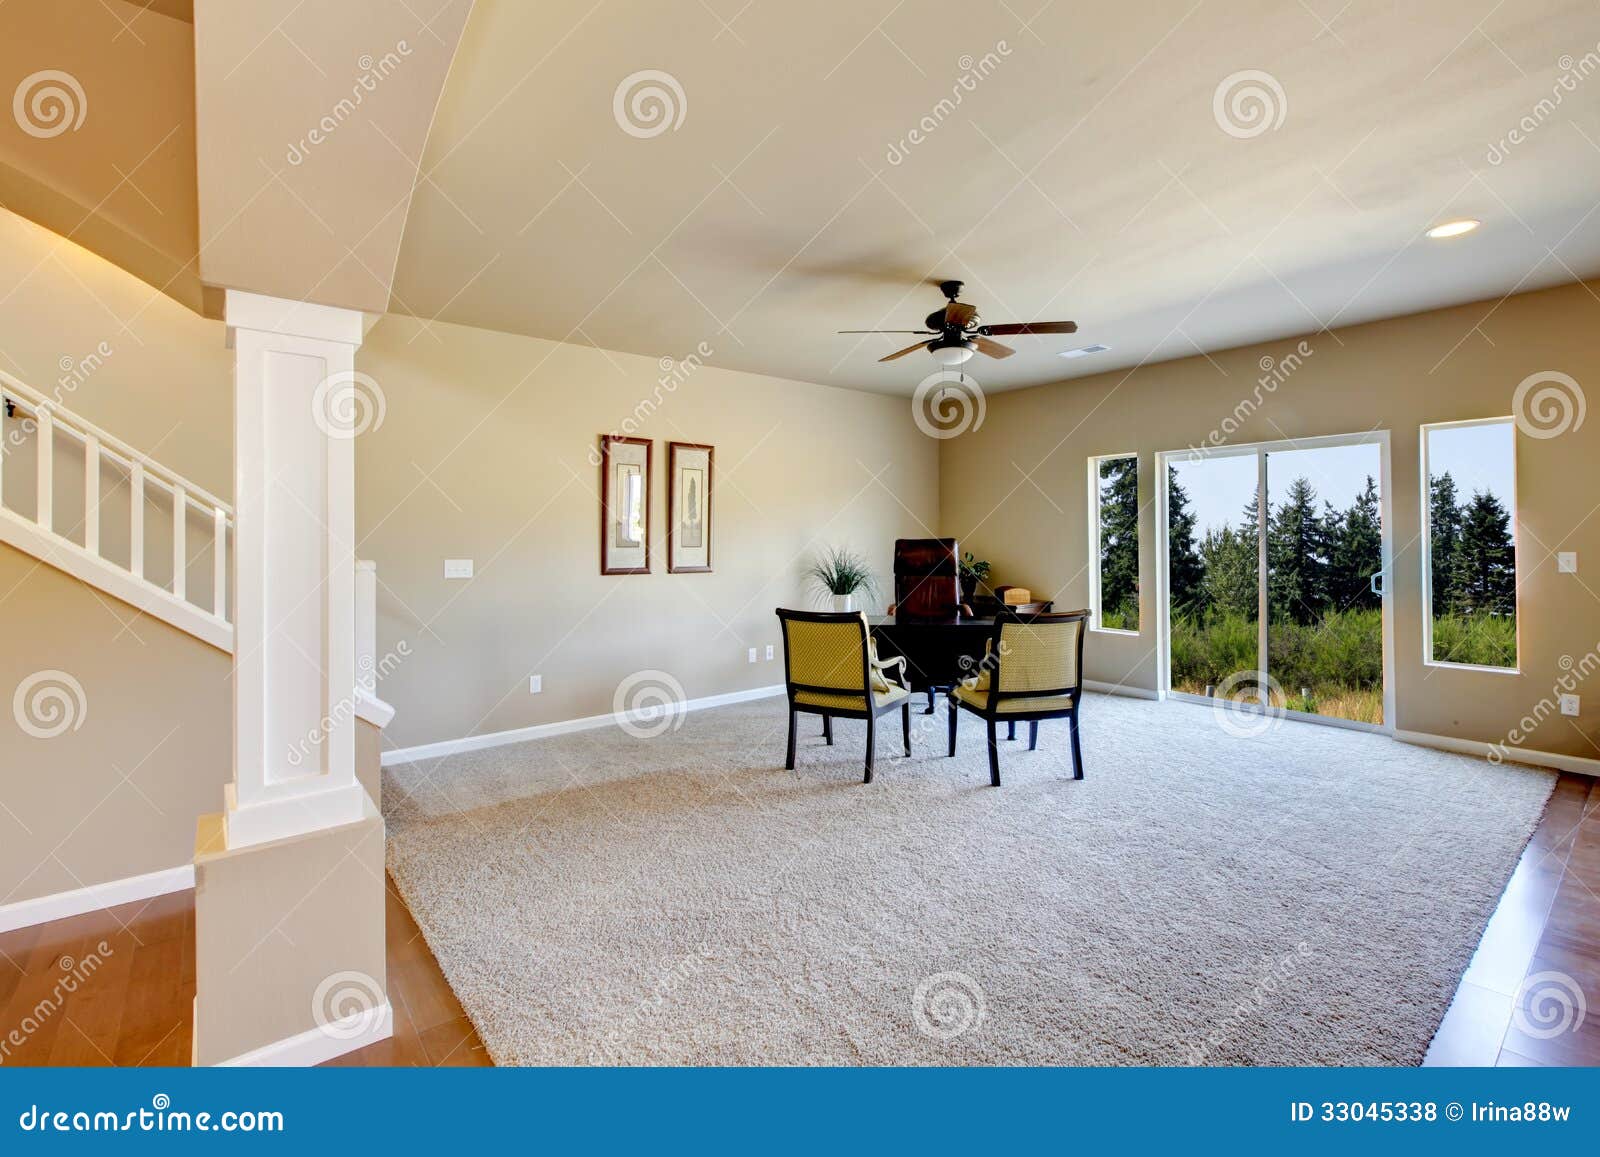 New Empty Room With Beige Carpet. Stock Photo Image of residential, empty 33045338